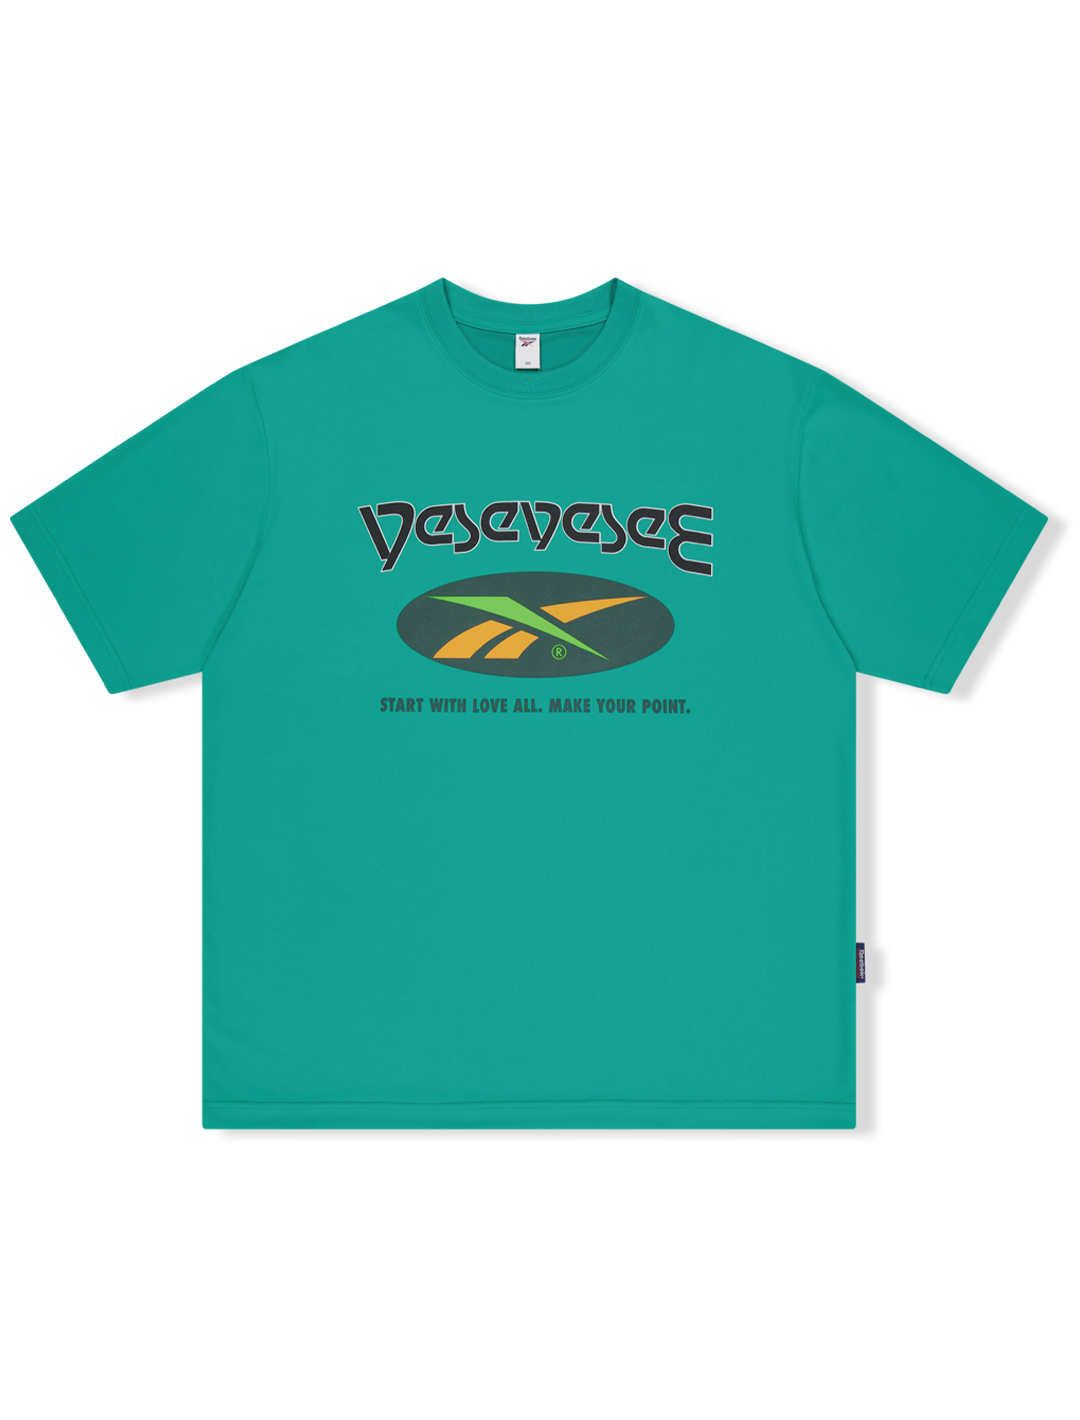 YESEYESEE x Reebok Mesh Work Out Tee Turquoise Blue